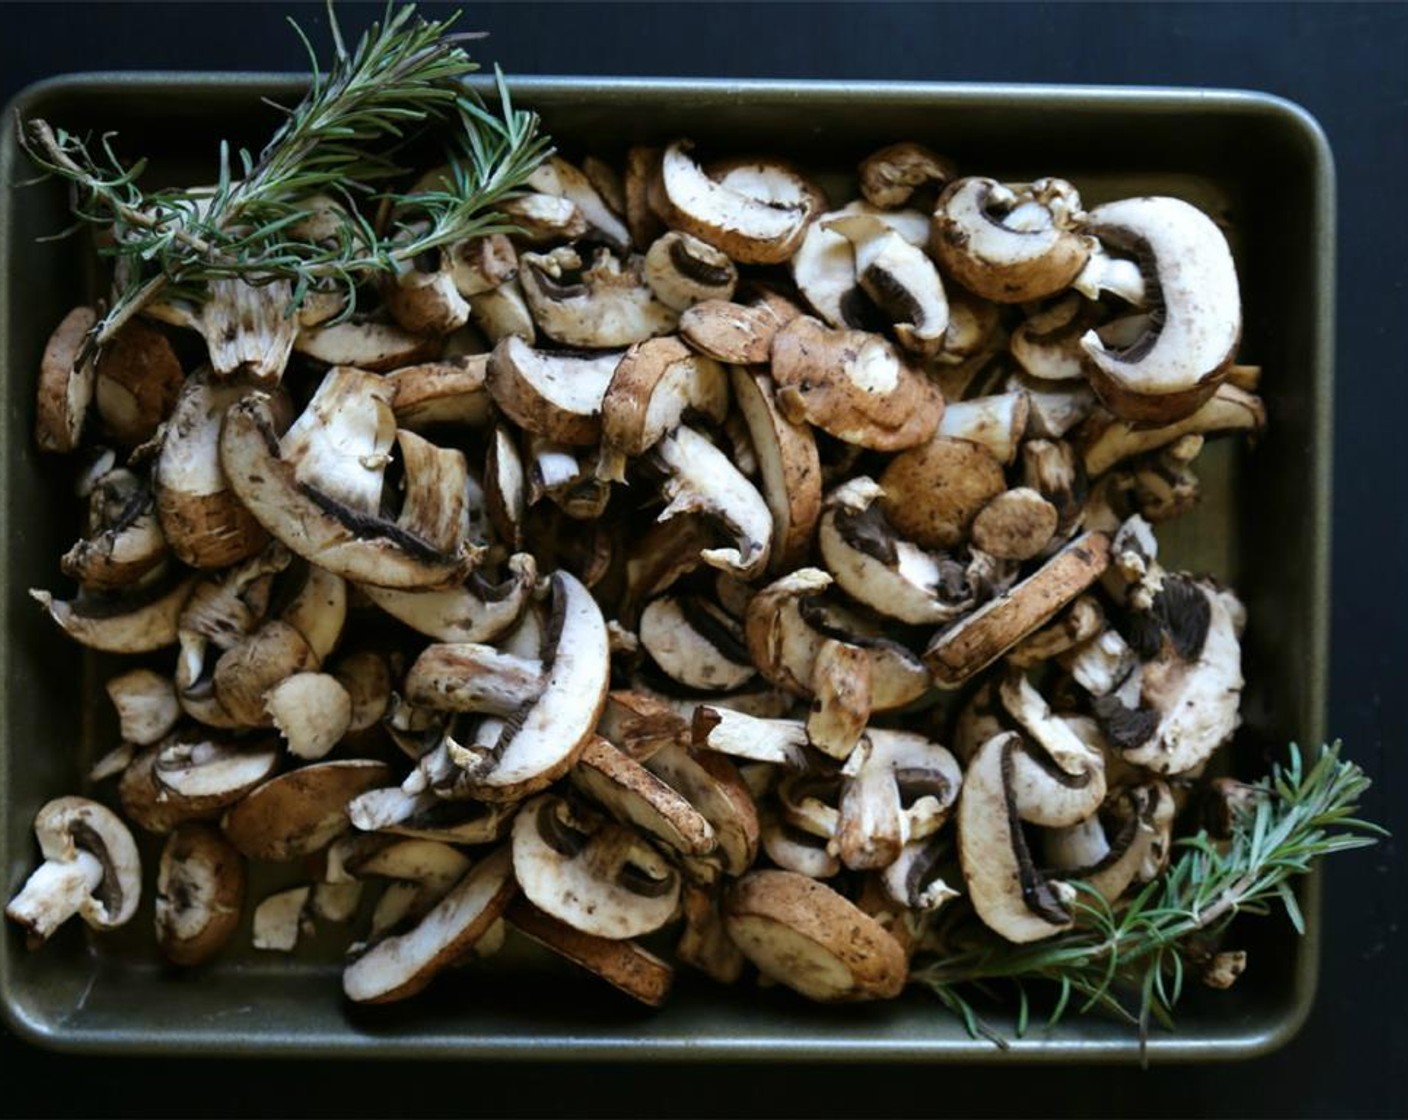 step 3 Next, add the mushrooms and Fresh Rosemary (1 Tbsp) and cook for another 3 minutes.